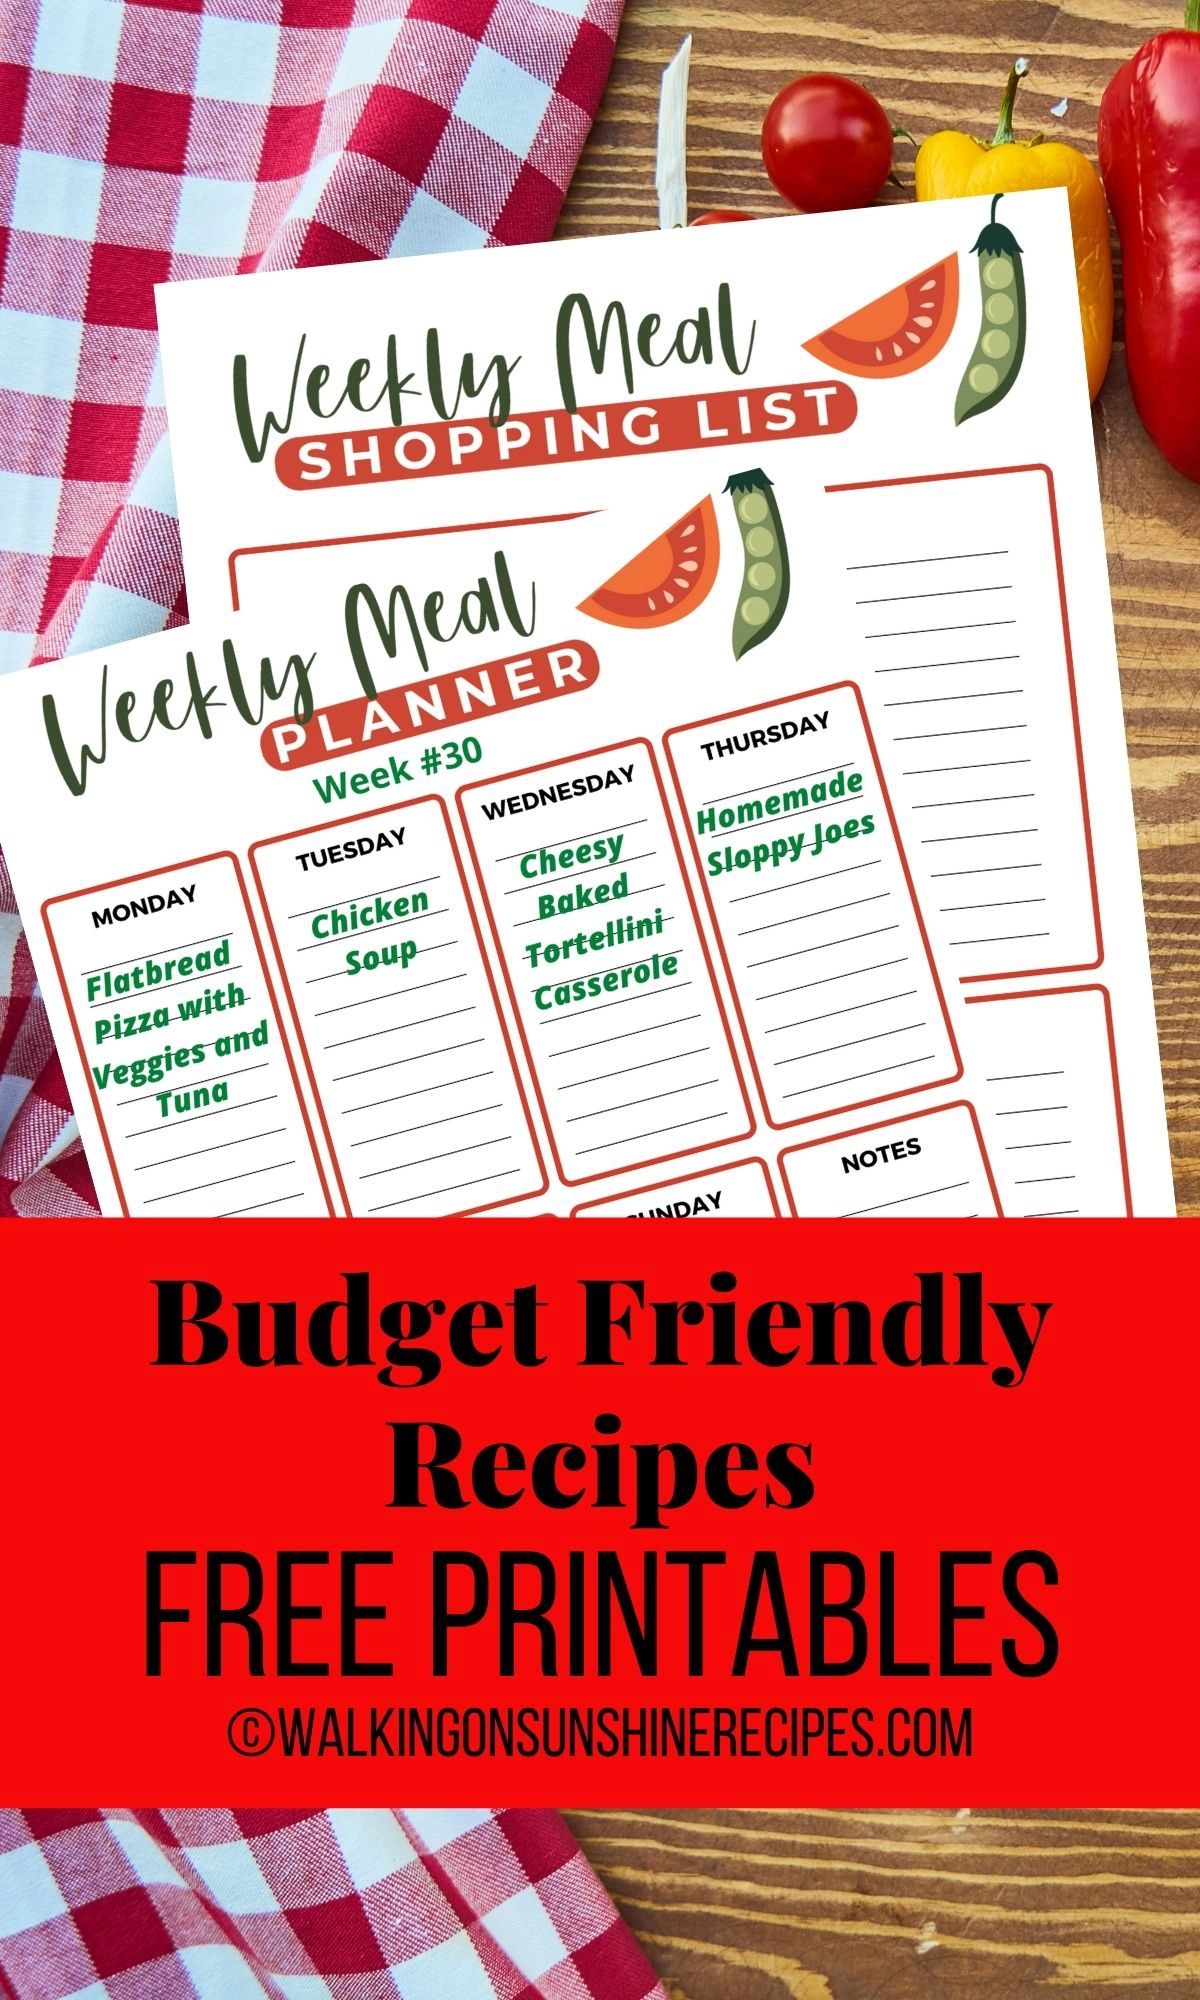 printable meal plans, shopping list and freezer list. 